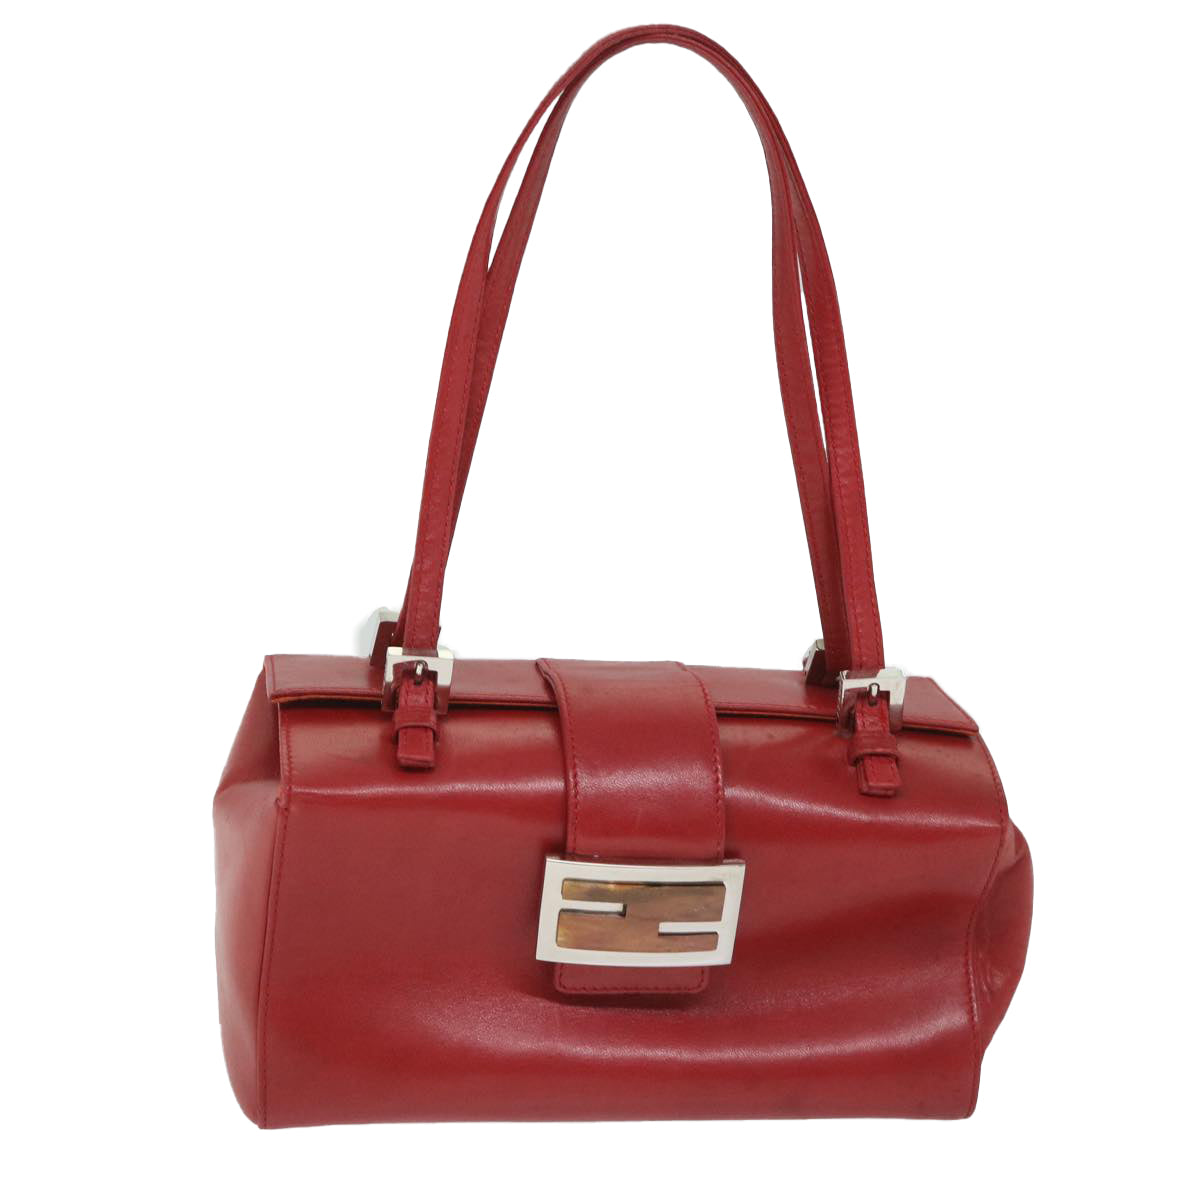 FENDI Mamma Baguette Hand Bag Leather Red Auth 56545